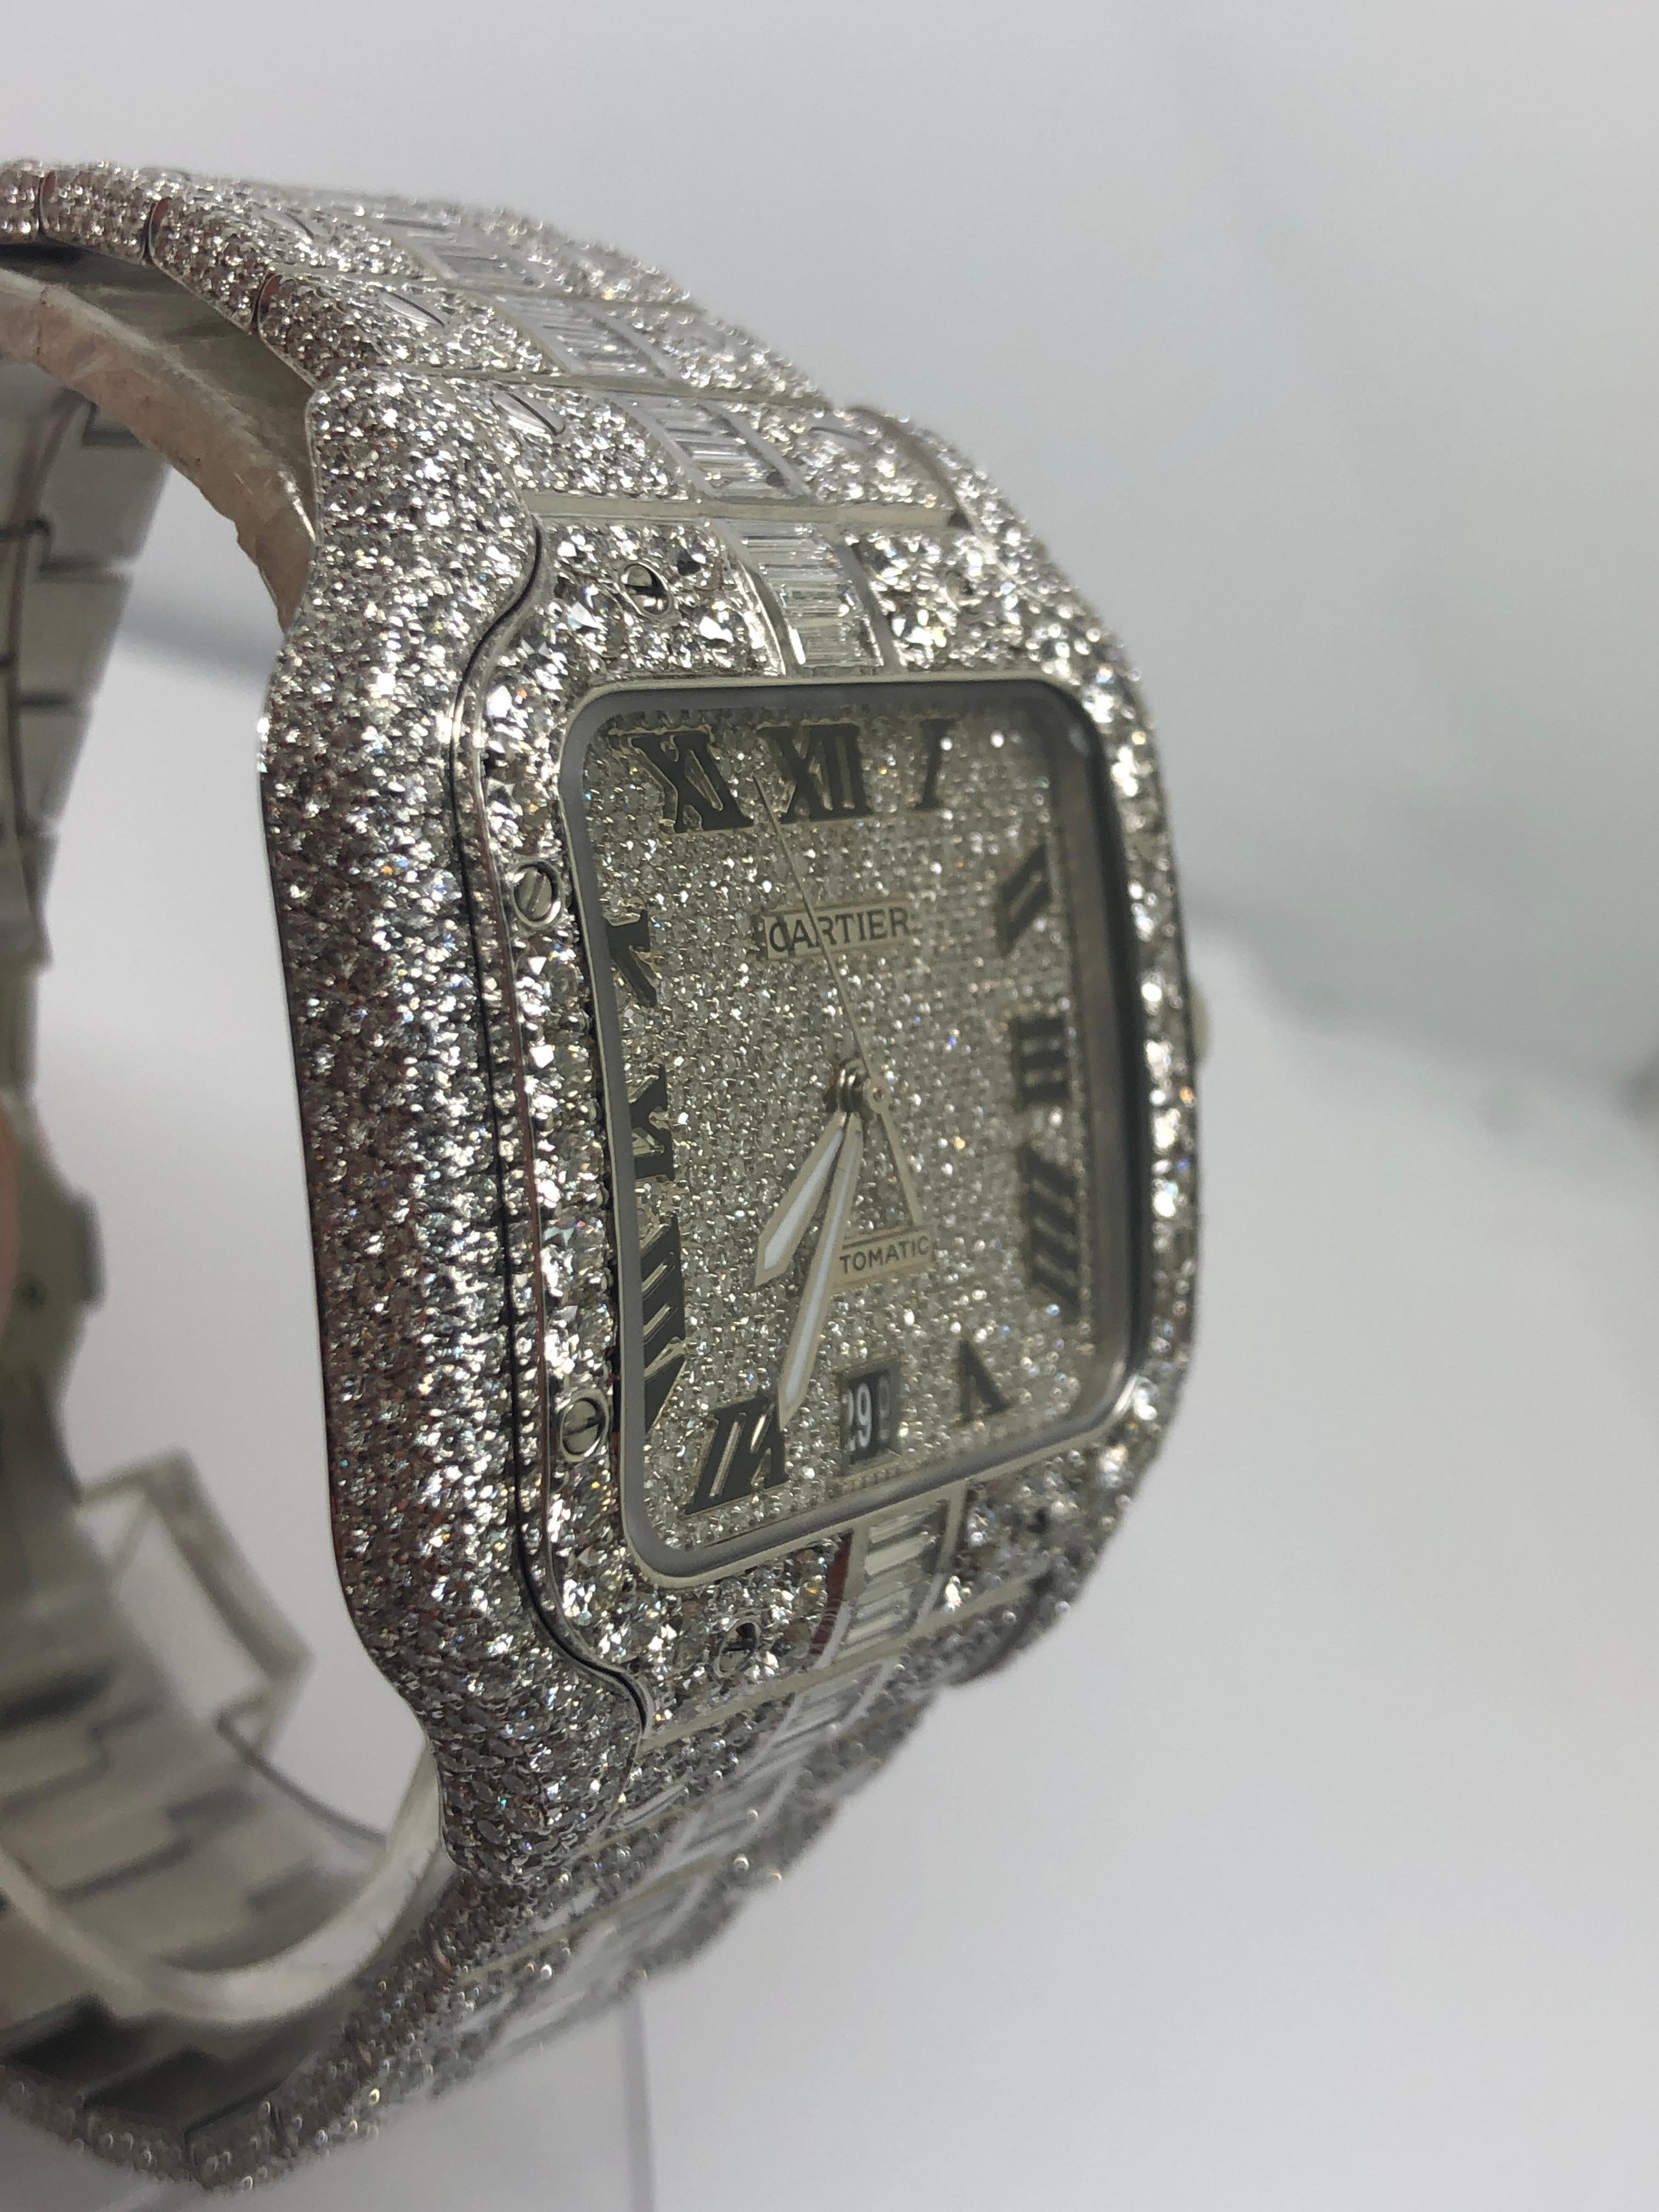 Brand New!!

100% Authentic Cartier Santos Iced out completely with collection quality vs2-si1 white natural round and emerald cut diamonds

26 carats in collection quality diamonds   also available with vs1-vvs clarity diamonds for an additional